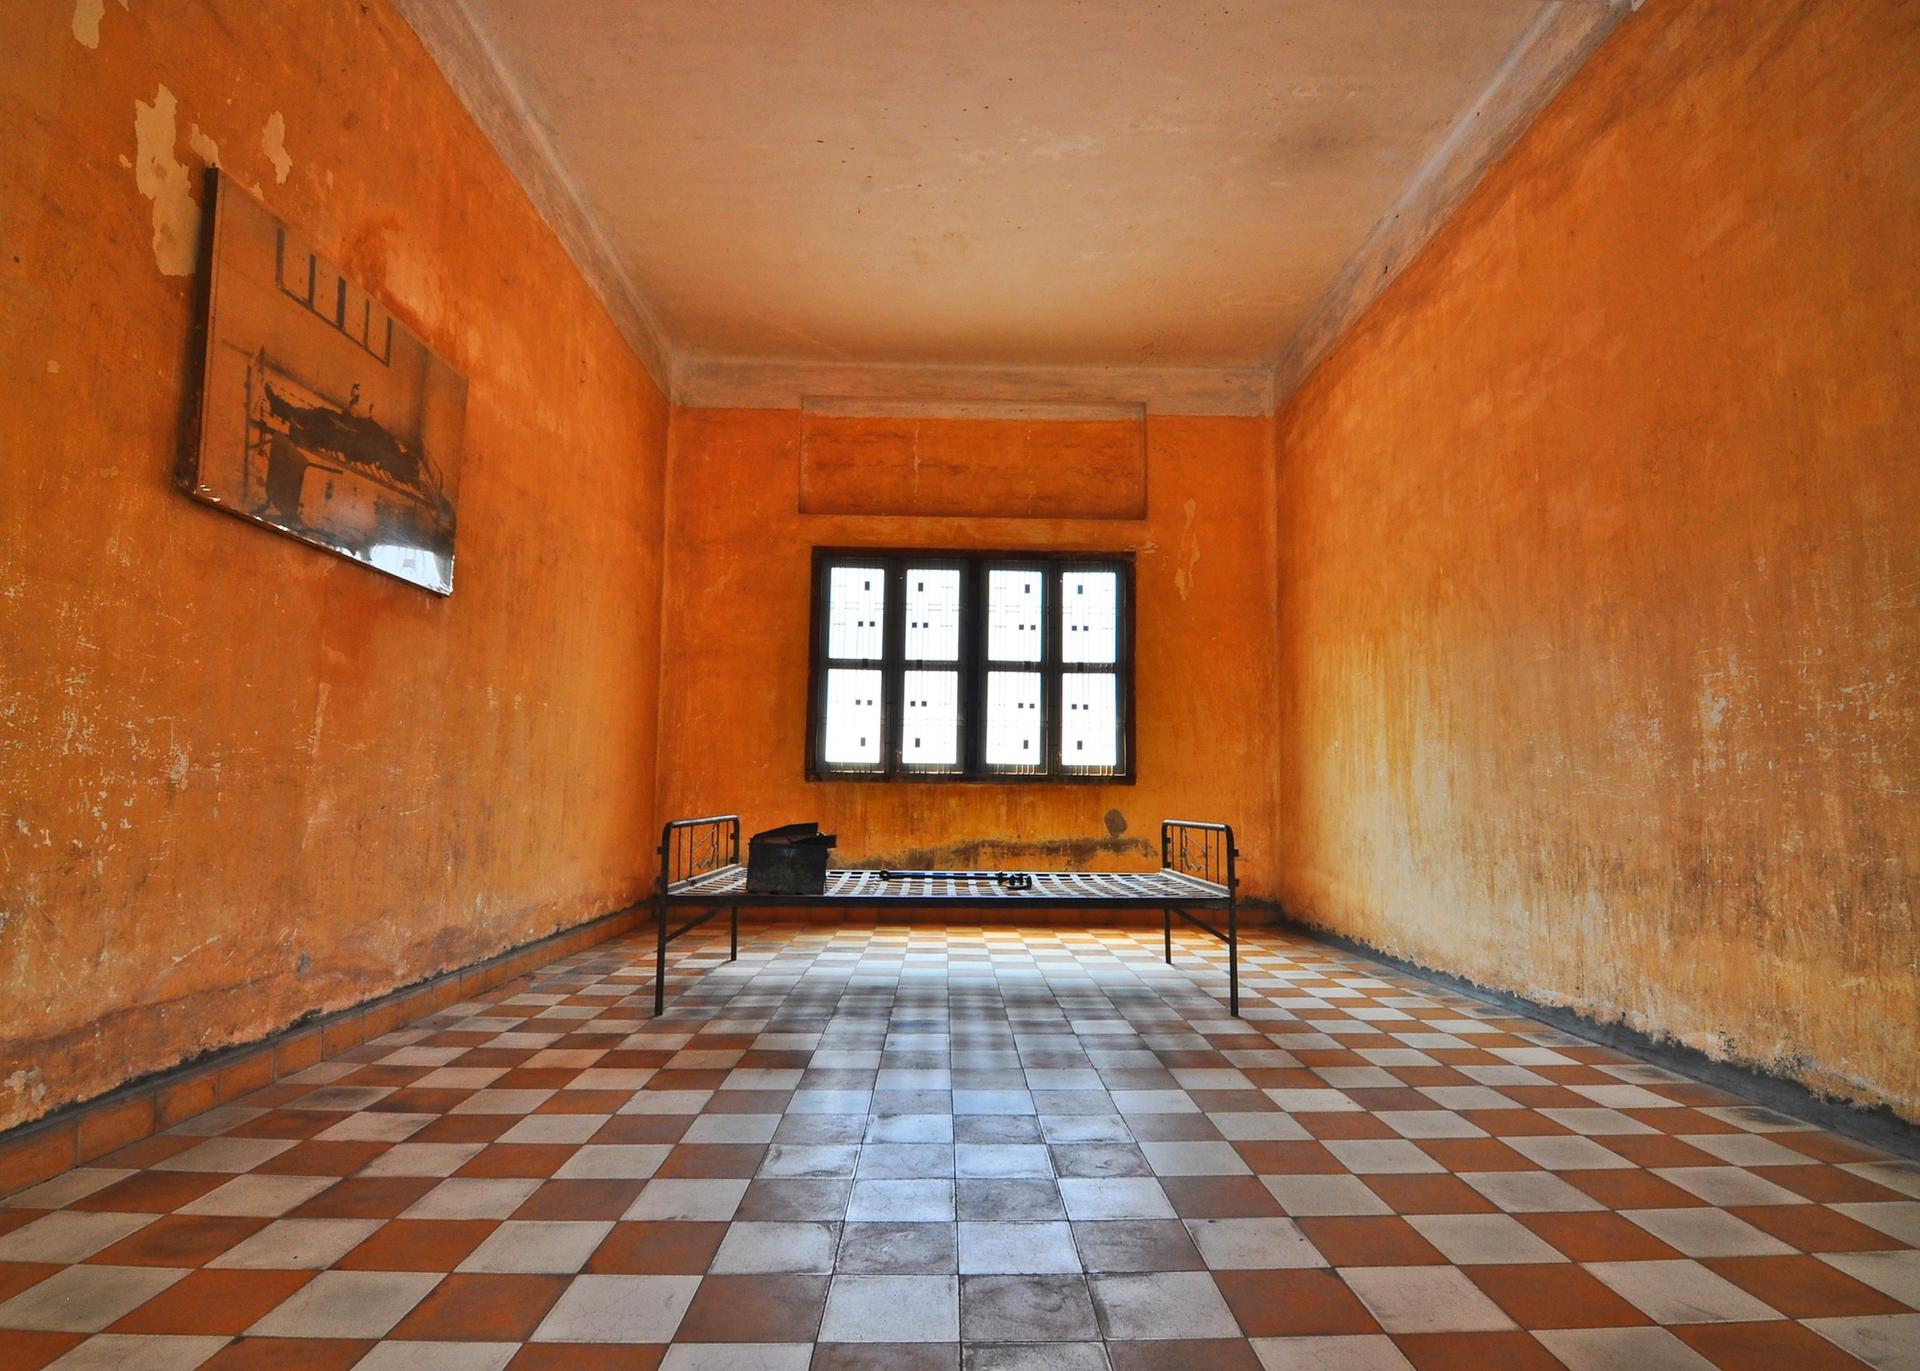 Tuol Sleng Genocide Museum was formerly the Security Prison 21 used by the Khmer Rouge communist regime in Phnom Penh, Cambodia © Flickr/nucksfan604